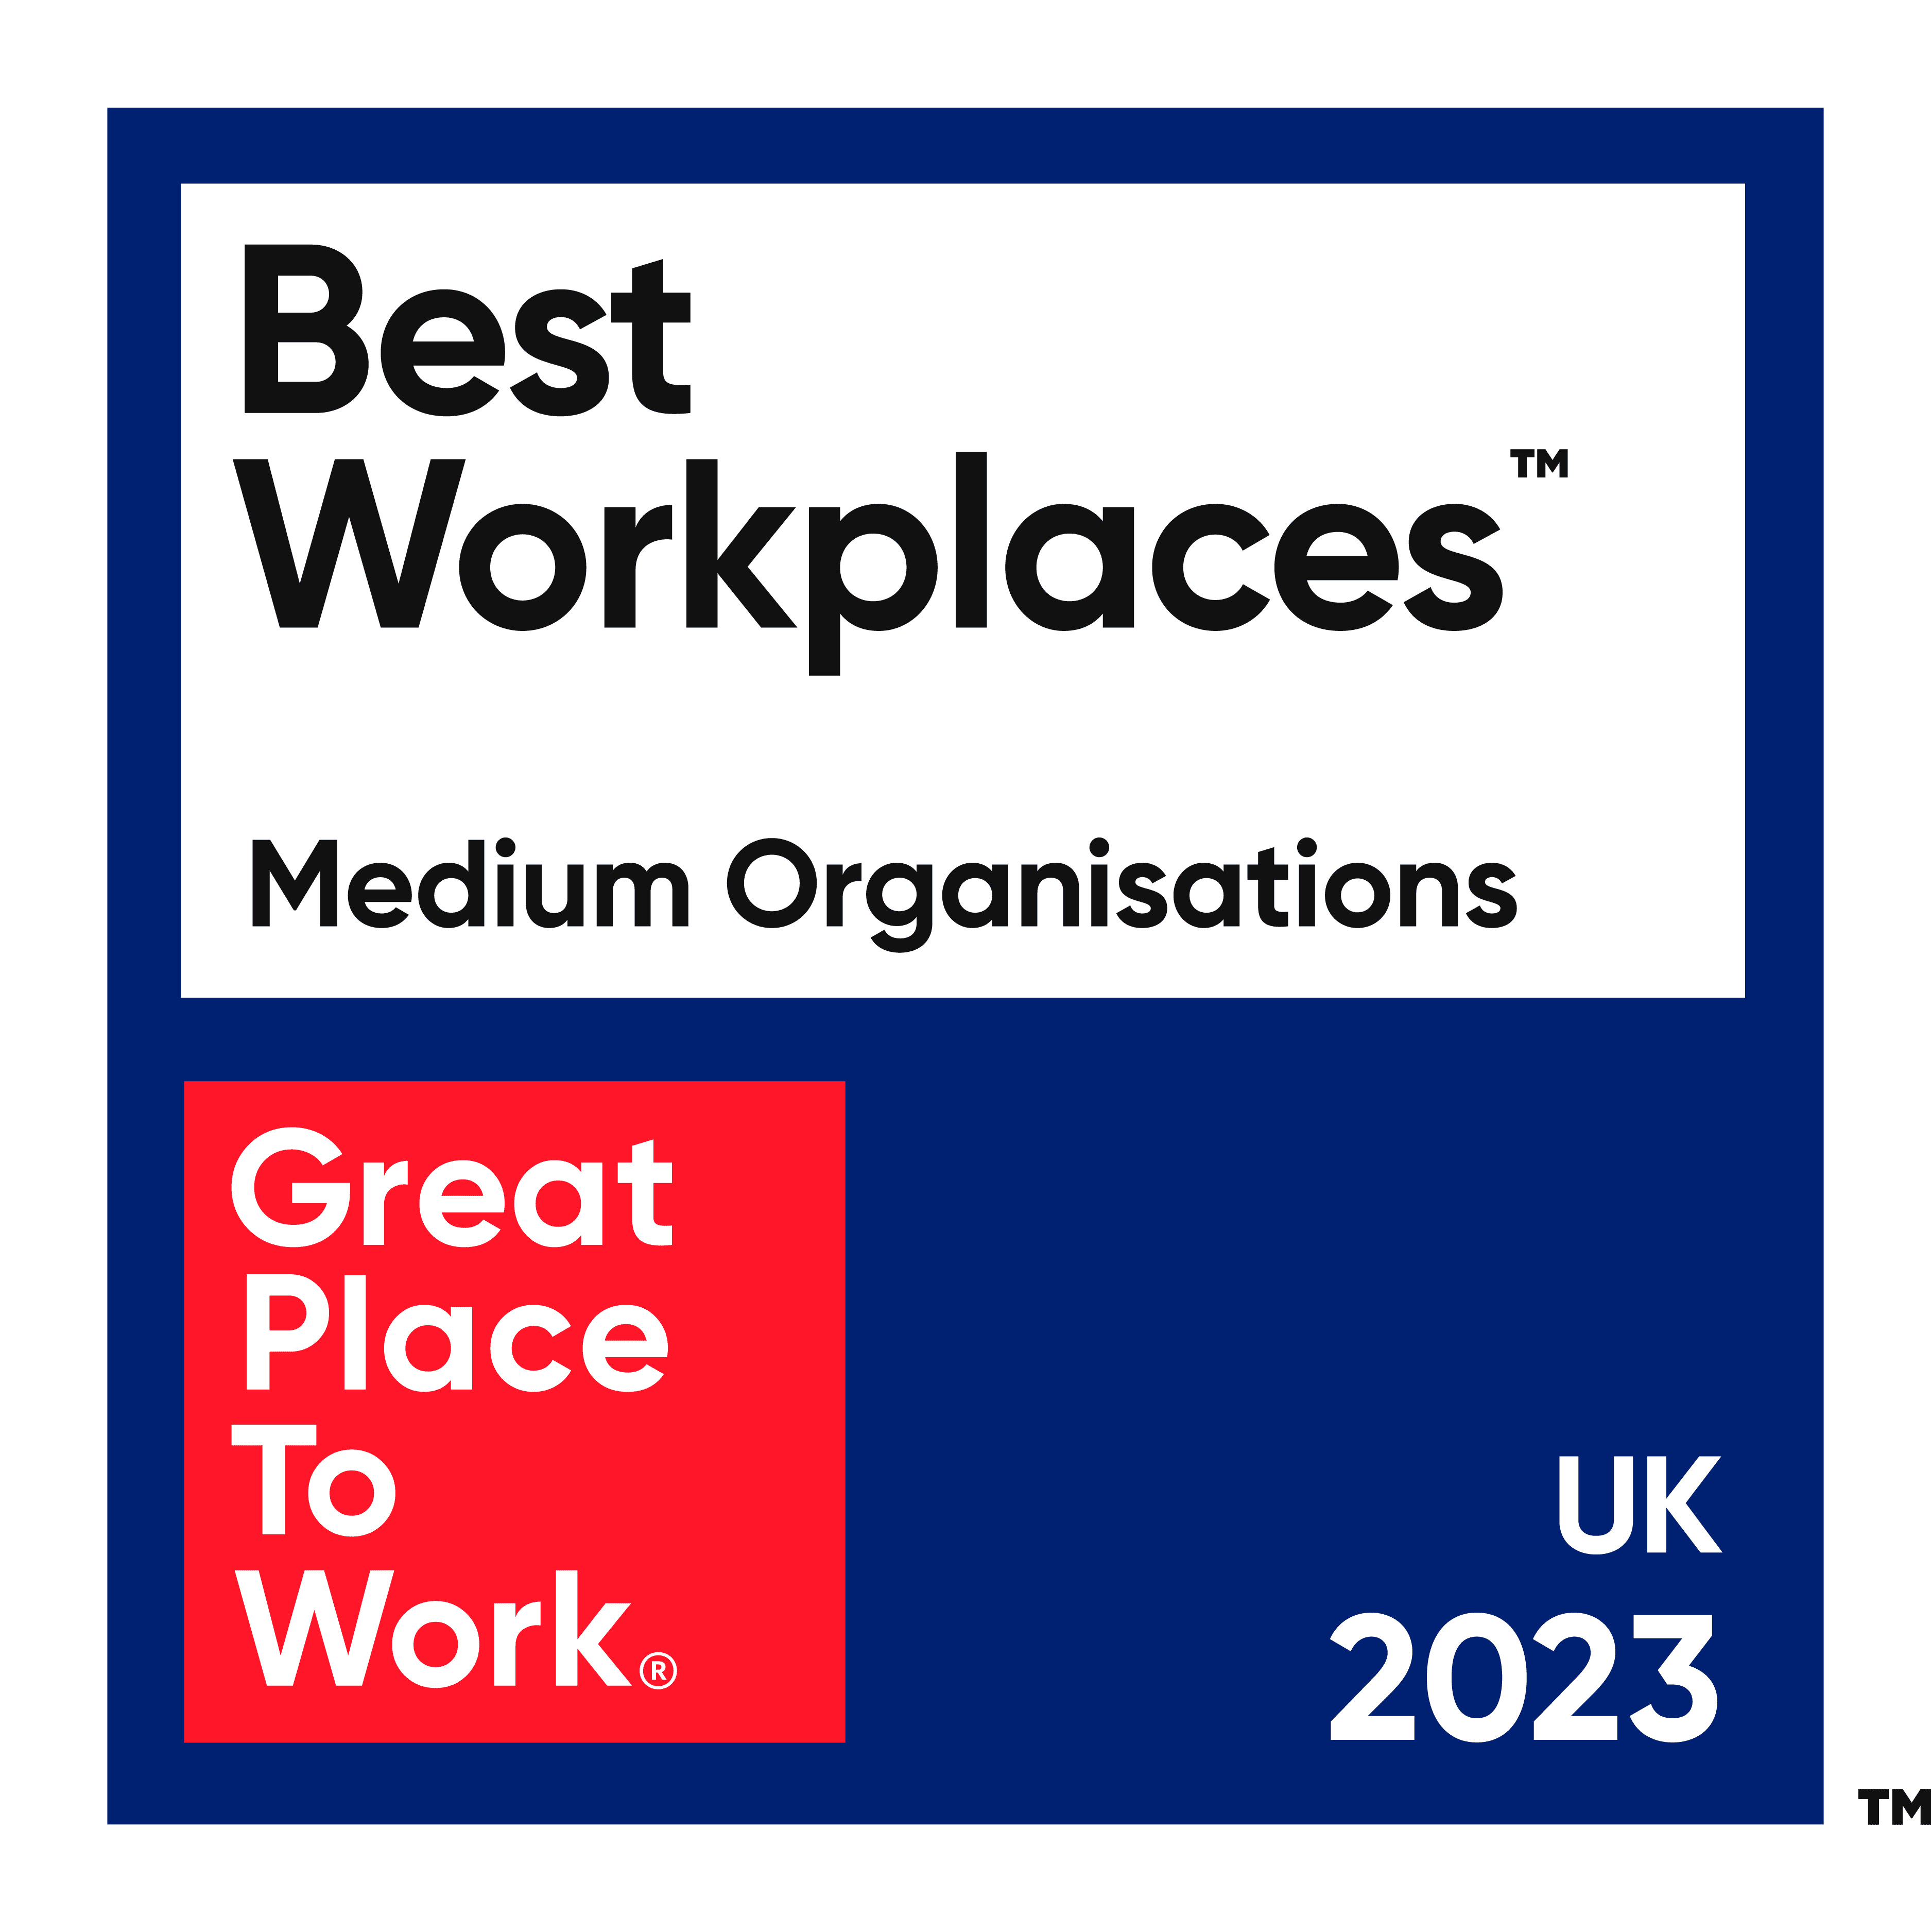 Homeprotect has been recognised as a great place to work in 2023